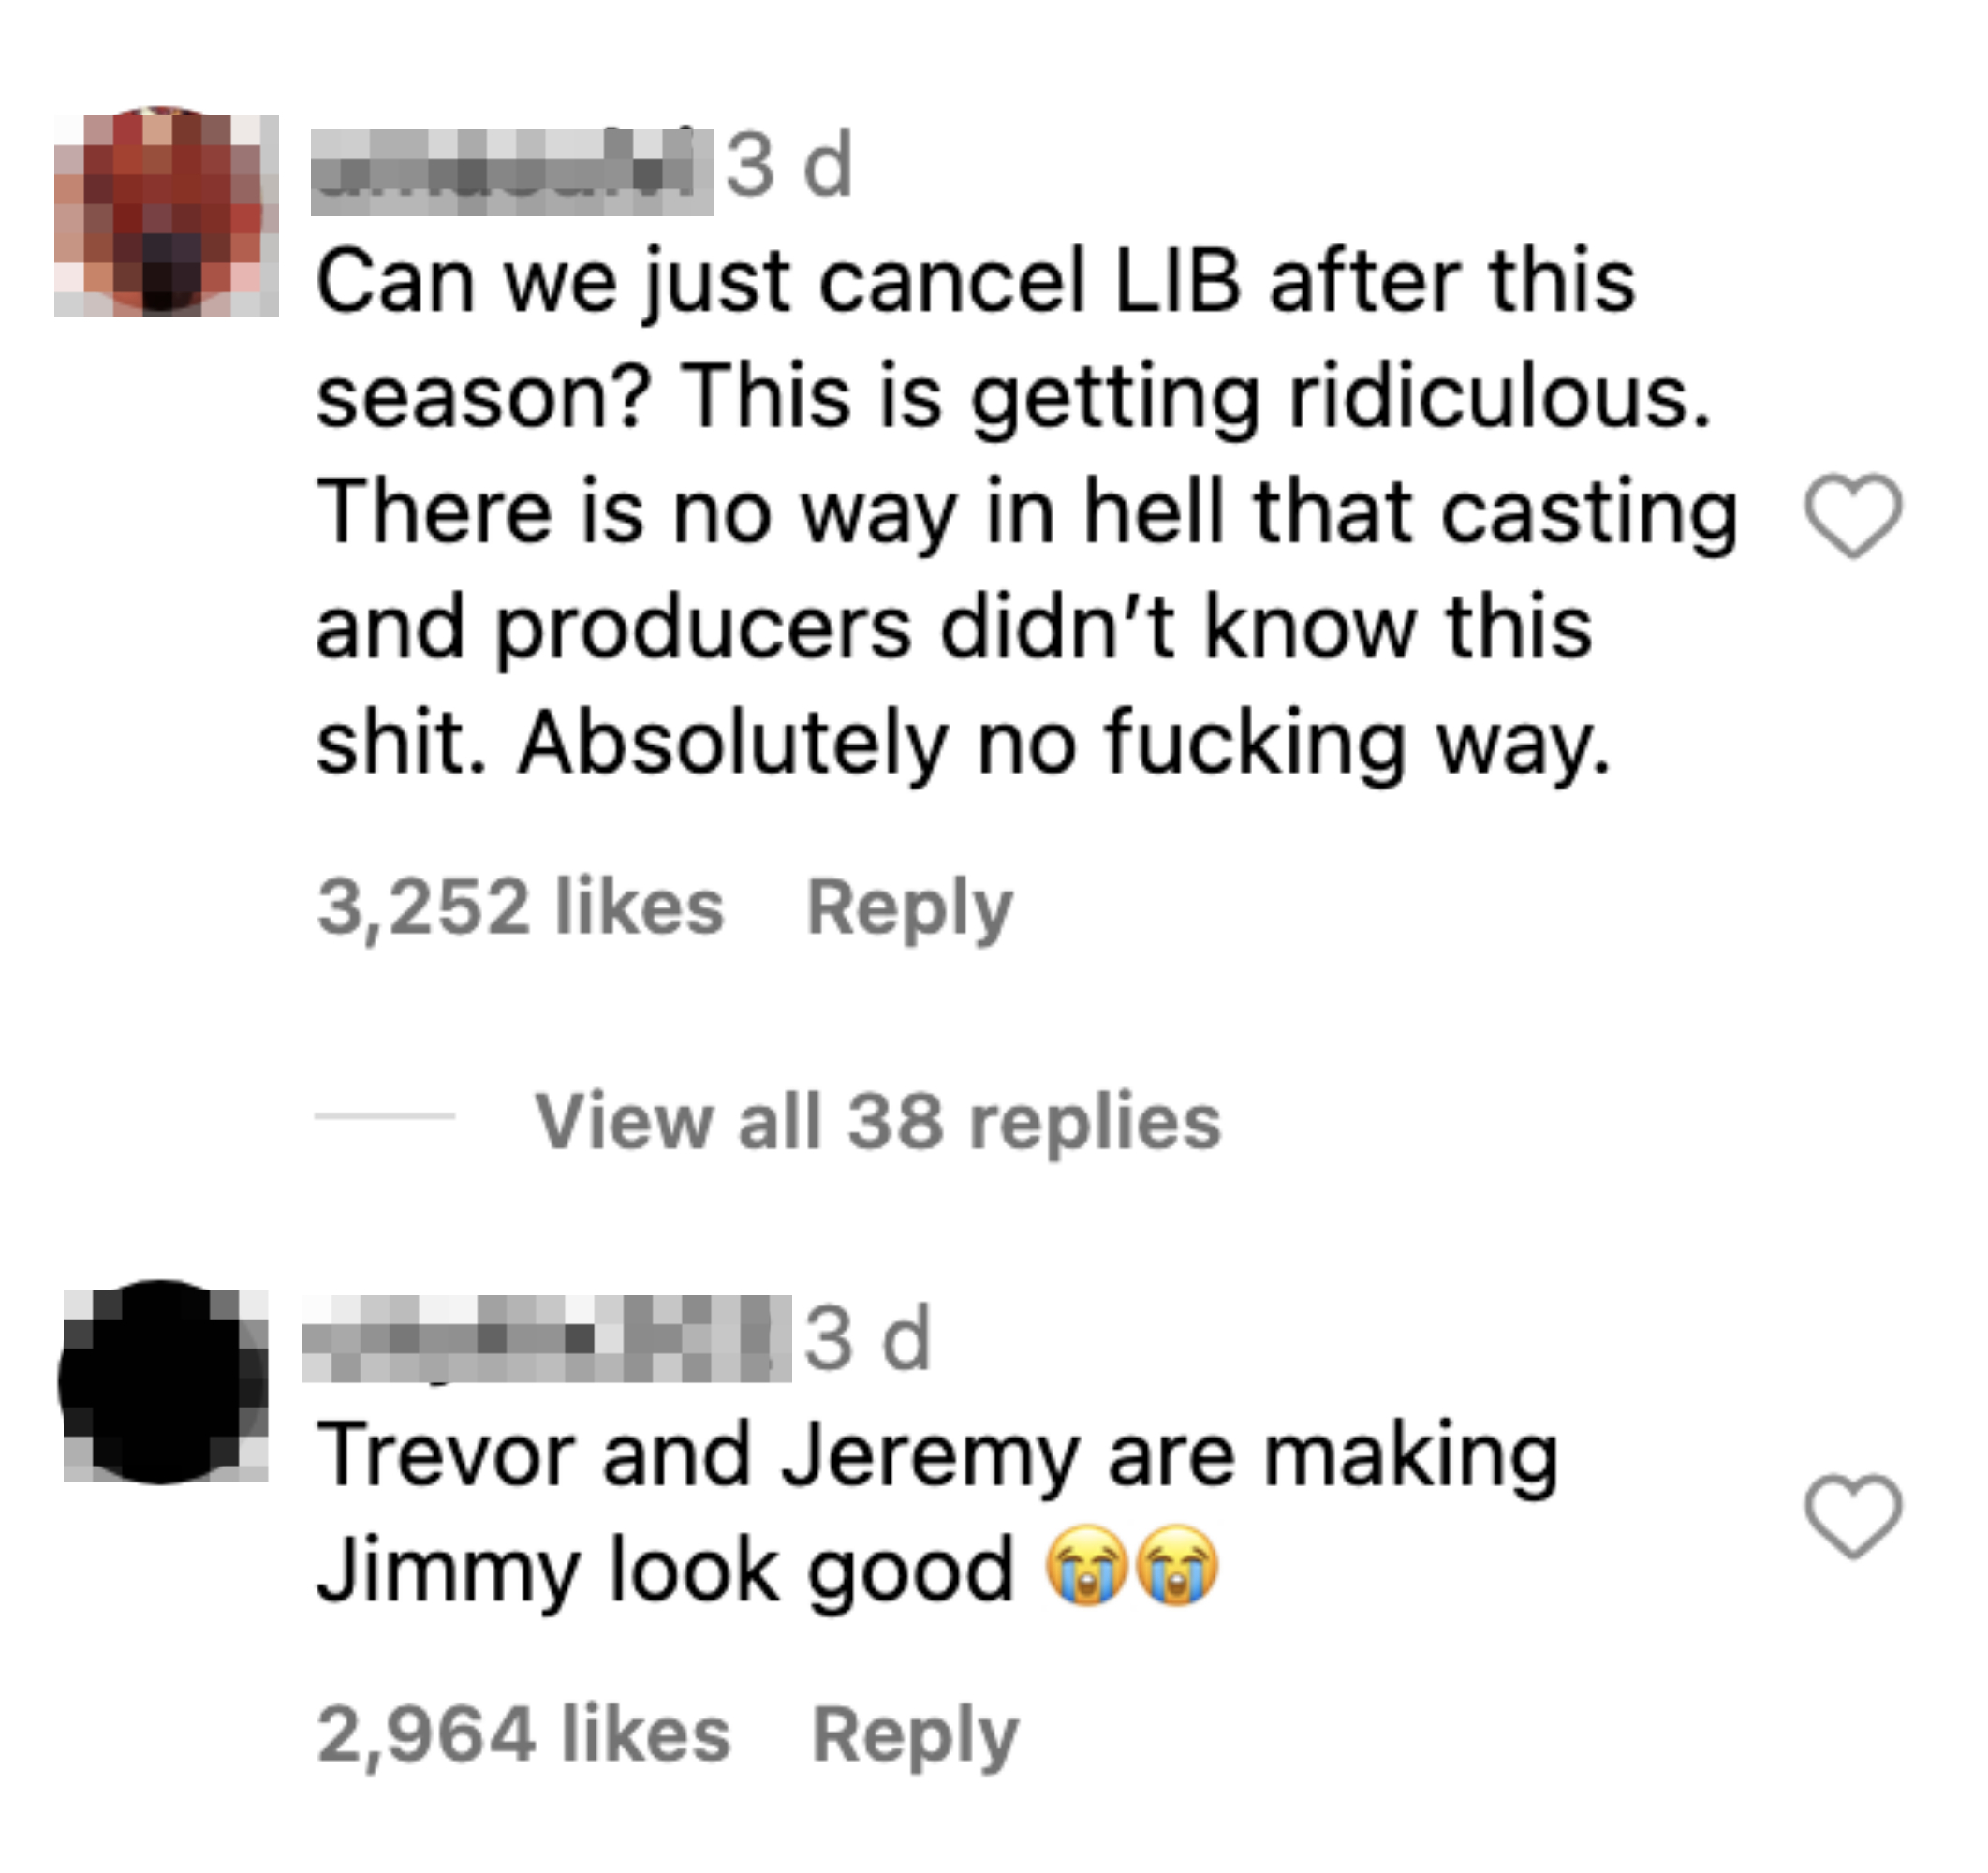 &quot;Can we just cancel LIB after this season? This is getting ridiculous; there is no way in hell that casting and producers didn&#x27;t know this shit&quot; and &quot;Trevor and Jeremy are making Jimmy look good&quot;